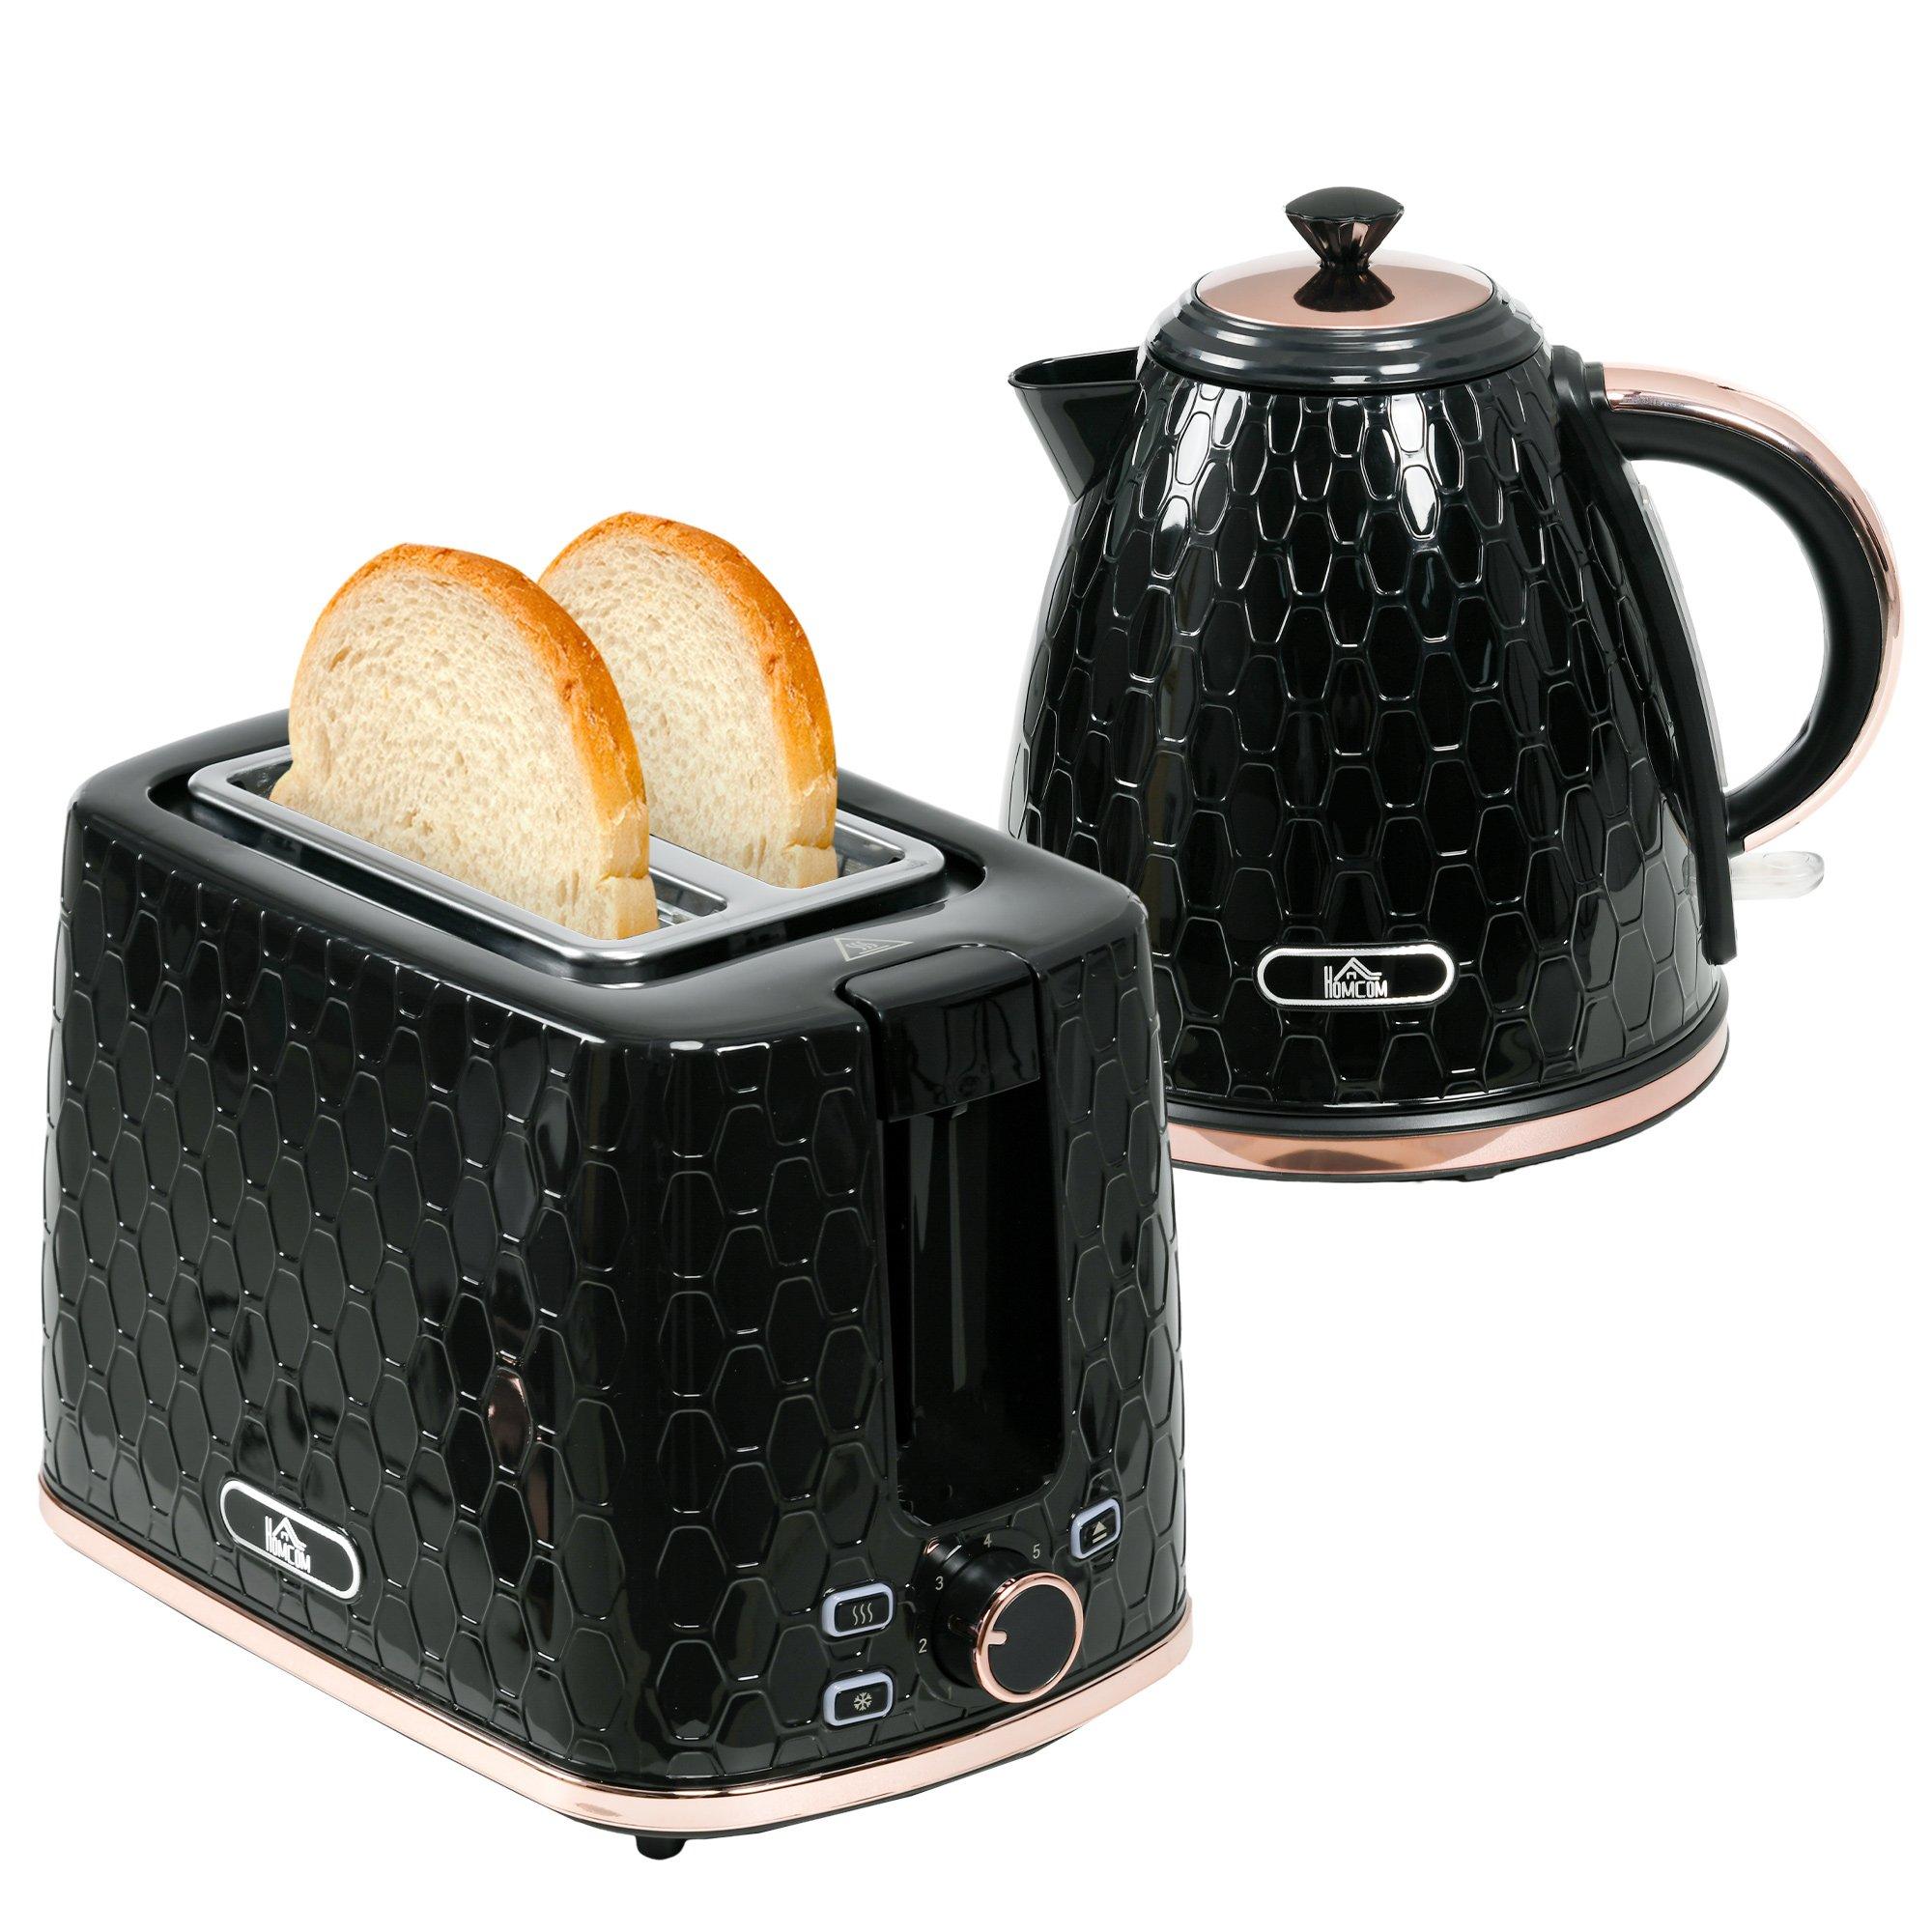 3000W Fast Boil Kettle and 930W 2 Slice Toaster Set with Auto Shut Off